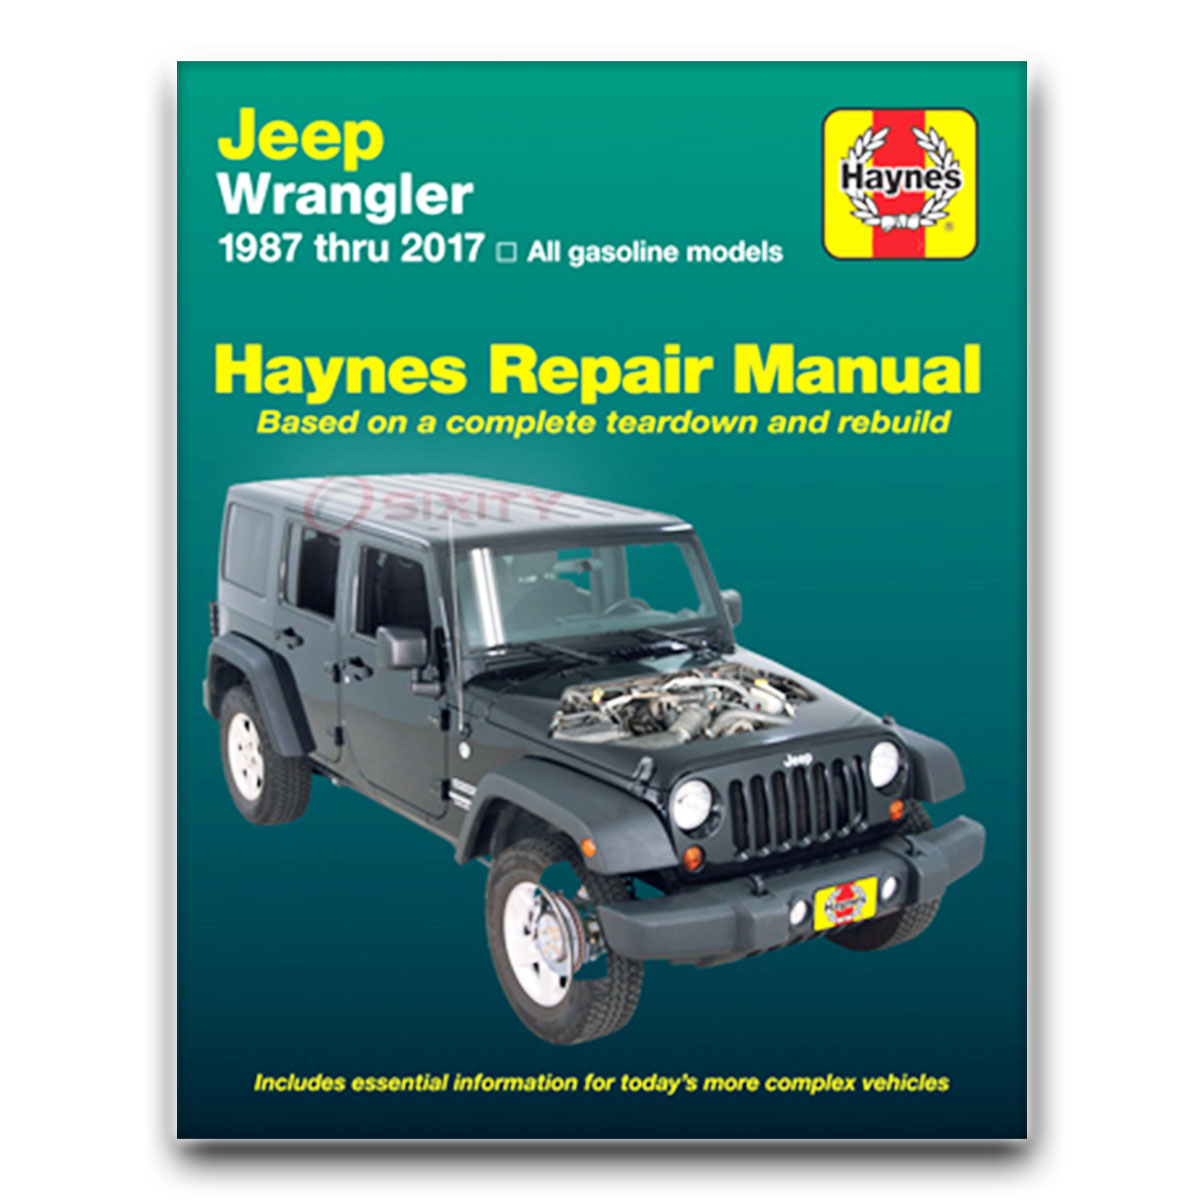 1995 Jeep Wrangler Service Manual Free Download architree